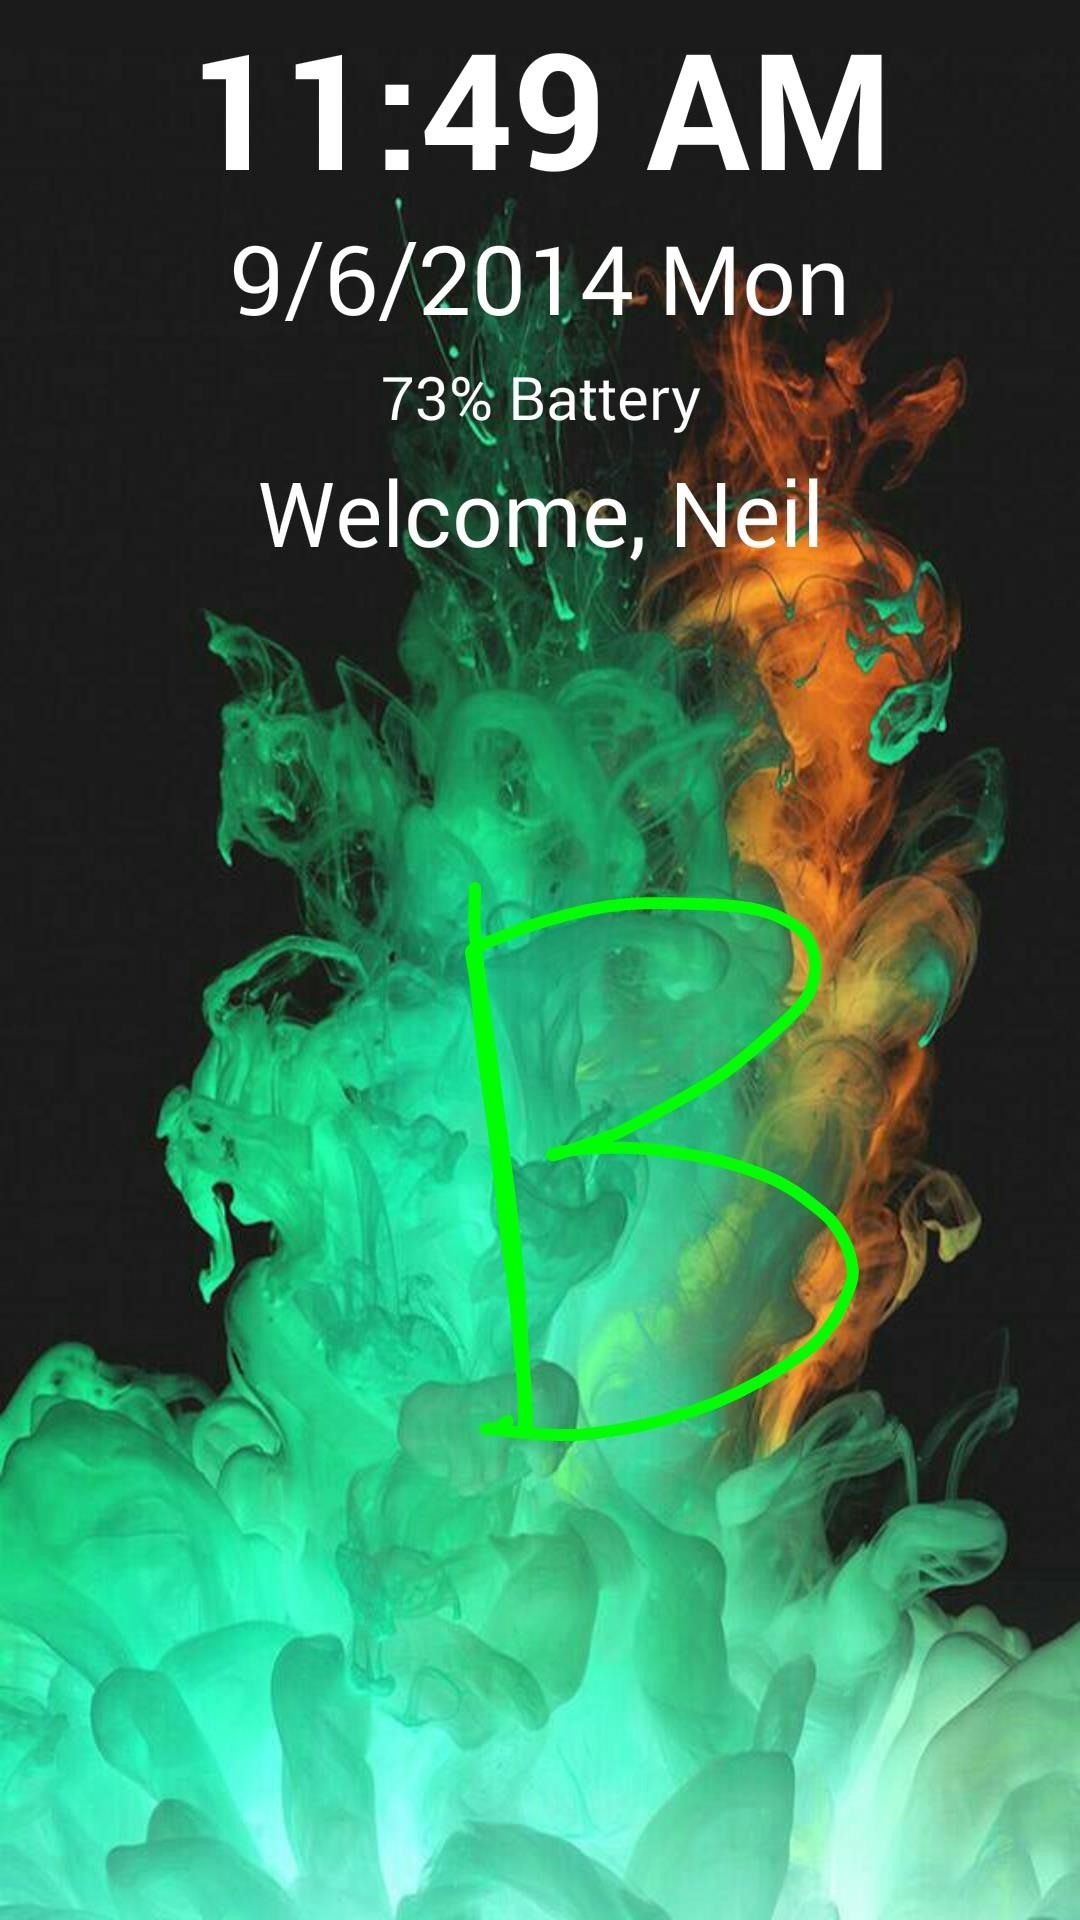 Use Drawing Gestures on Your Galaxy S4’s Lock Screen to Perform Actions Faster